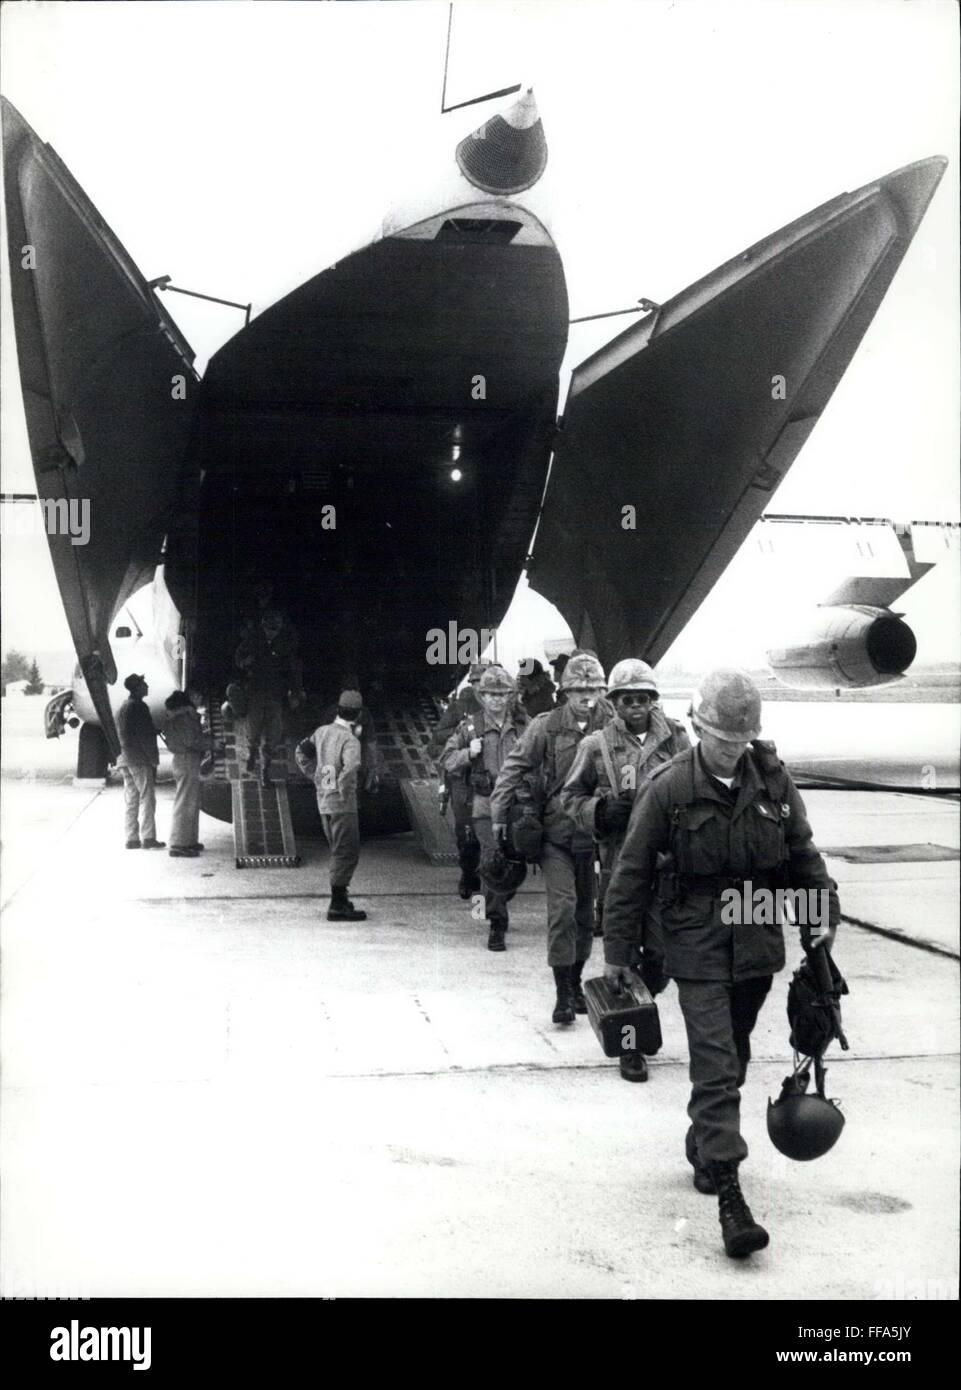 1974 - The first transport planes which bring US-troops to West-Germany have landed. 12,000 Soldiers from the United States Army will be flown to their West-German bases. From October 10th until 21th 1974 they will take part in the field exercises in the Stuttgart-Ulm and the Munich-Nuremberg area. Photo shows the second of the 25 transporters going to land on the US-part of the Stuttgart airport Exhterdingen. © Keystone Pictures USA/ZUMAPRESS.com/Alamy Live News Stock Photo